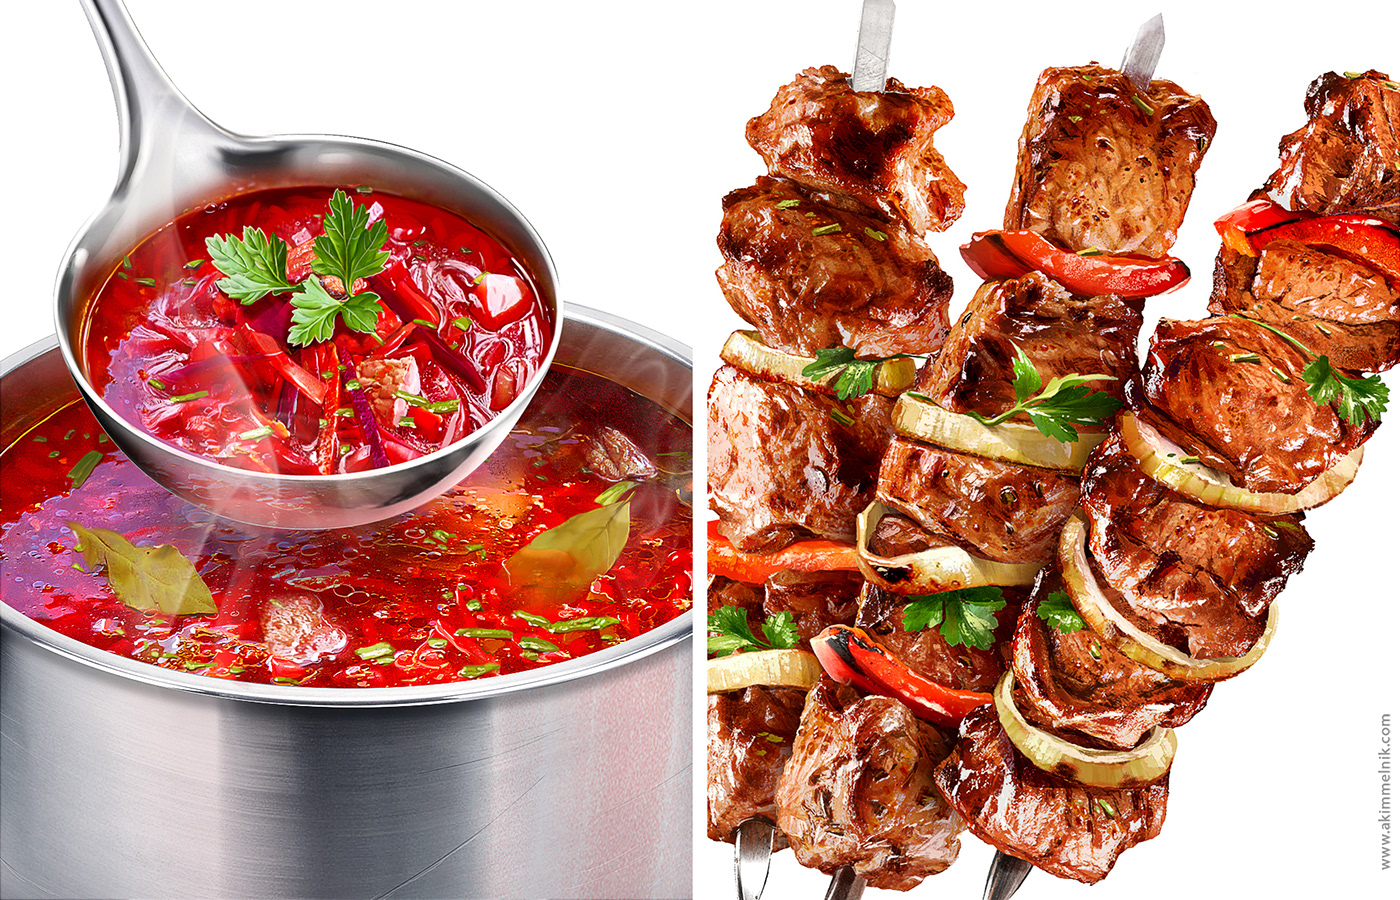 Illustrations of borscht and shish kebab for spice packages